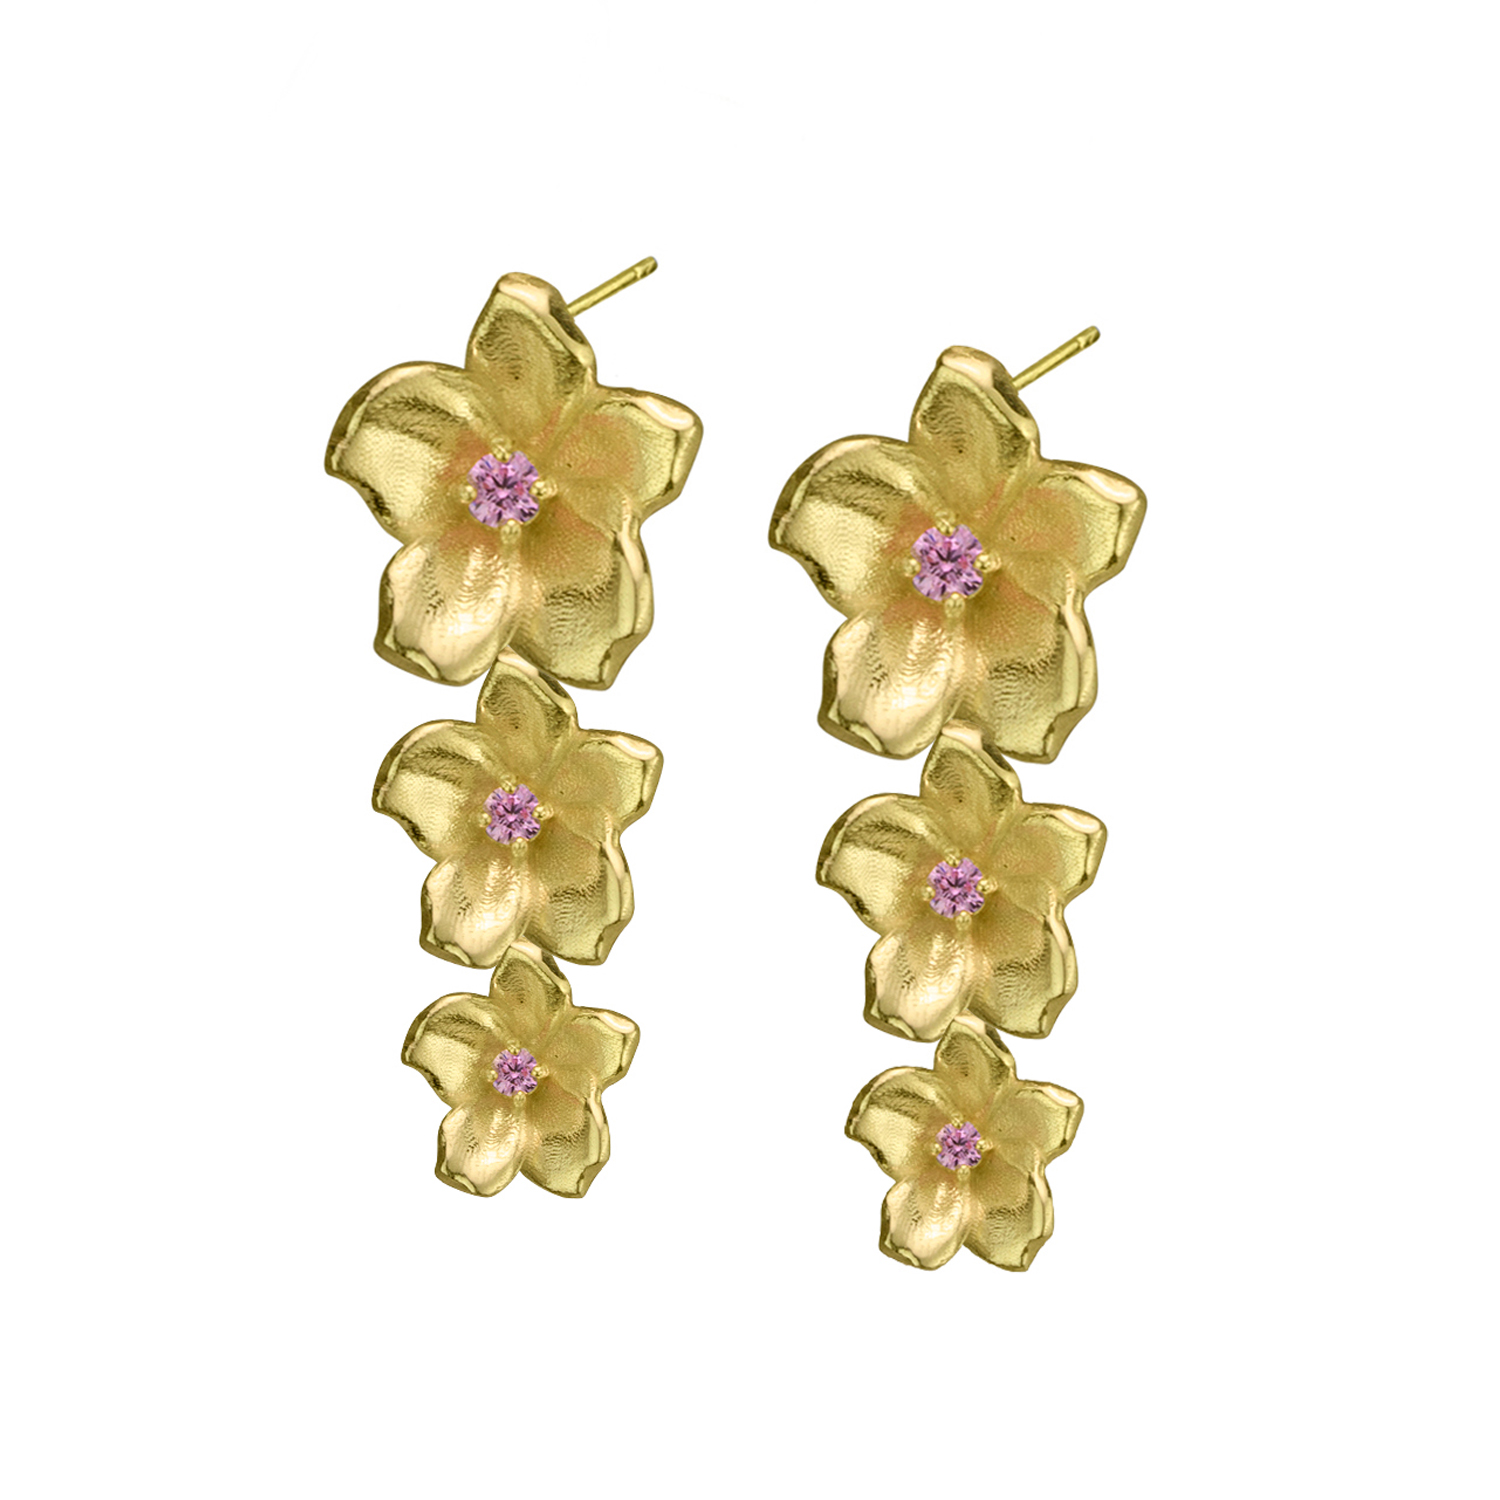 Send Exquisite D Shaped Pearl Earrings-Canada Gift Online, Rs.3175 |  FlowerAura